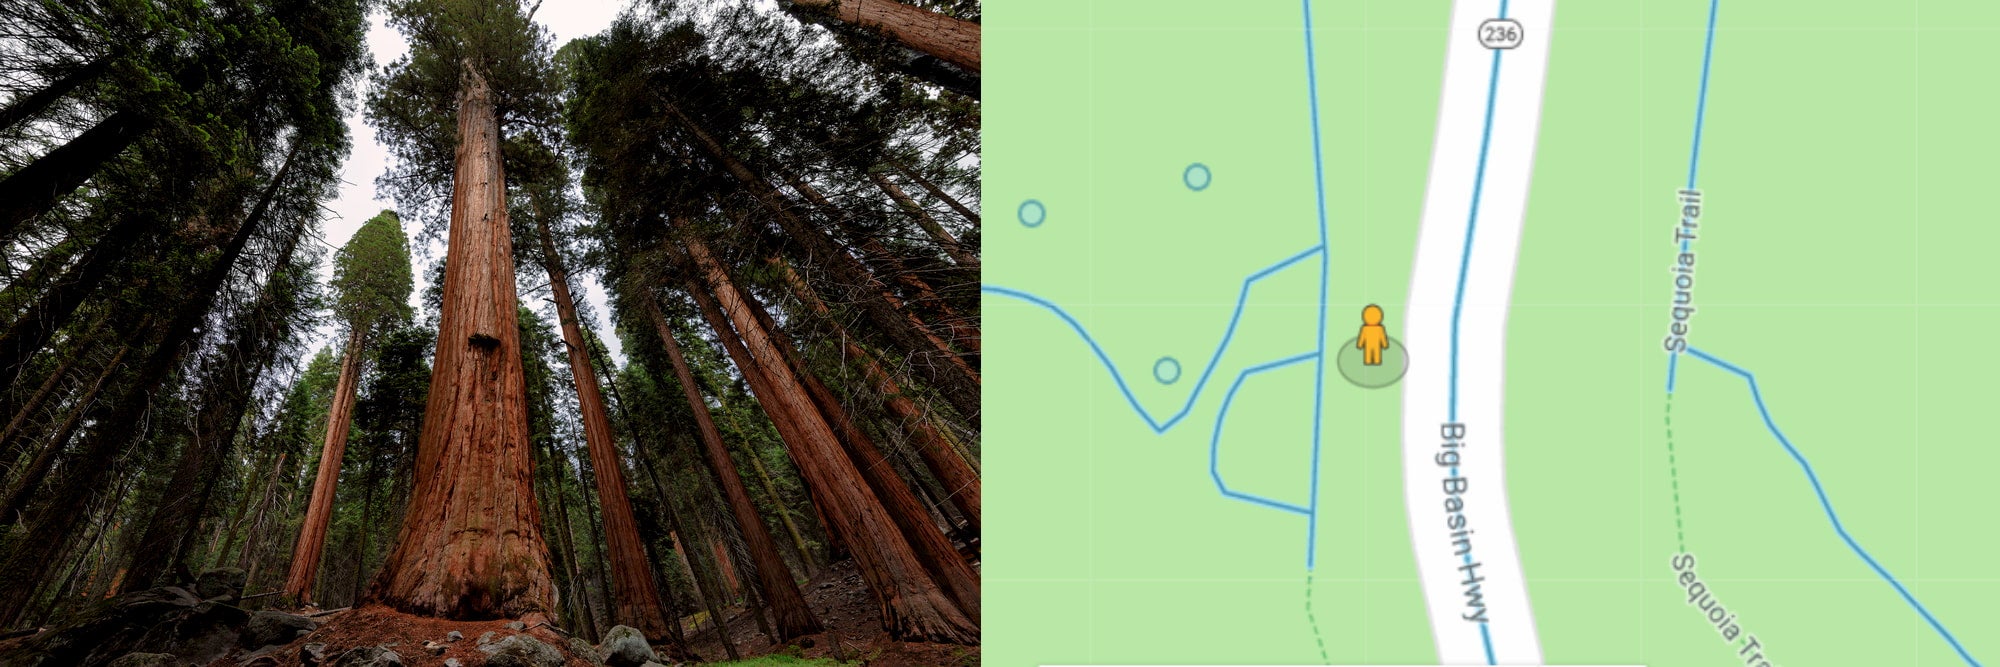 California redwoods and google map with streetview icon